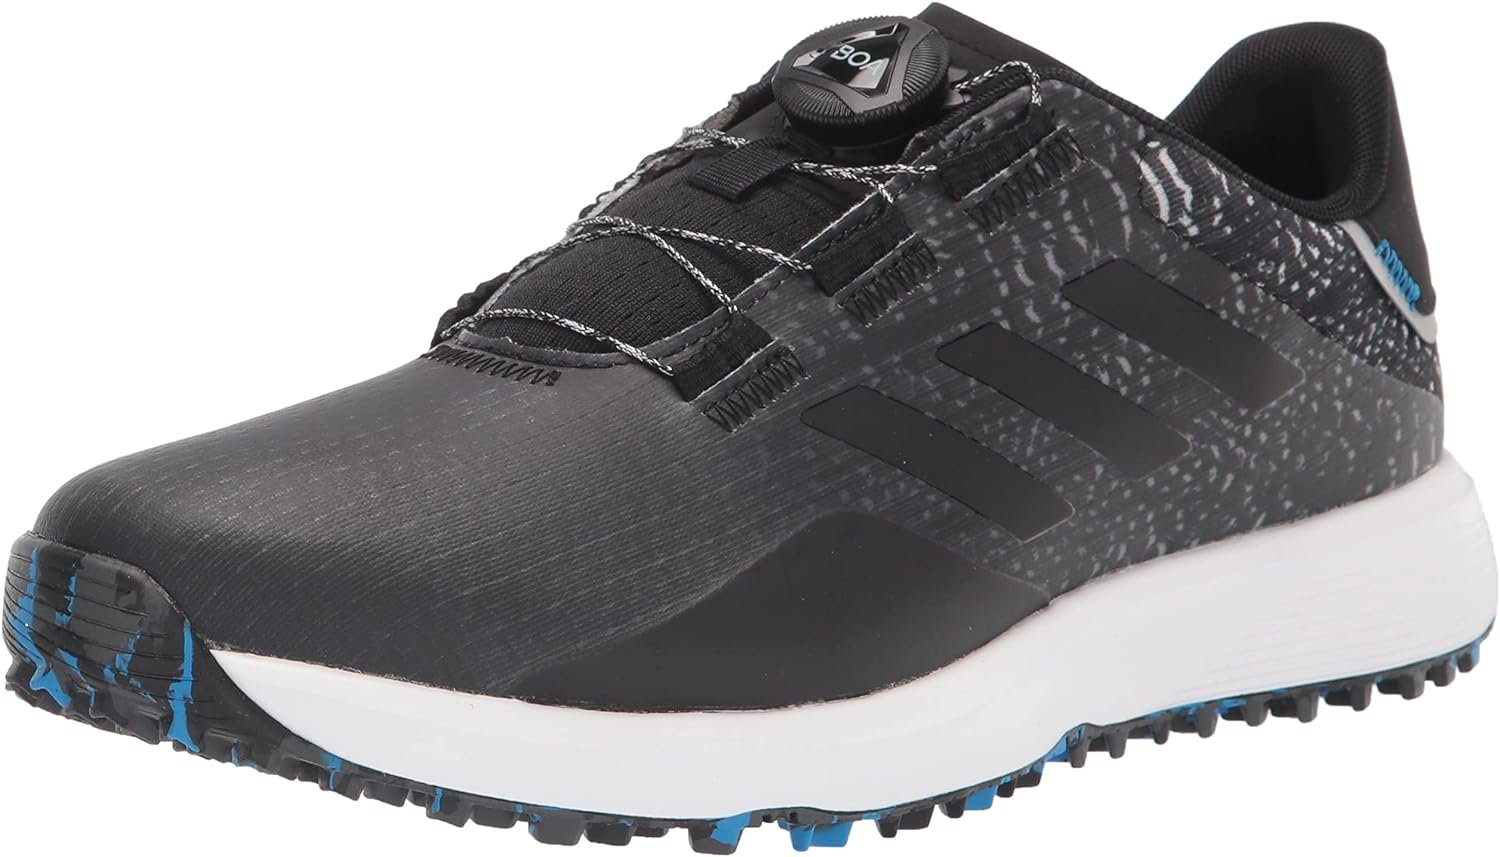 adidas Mens S2g Boa Wide Spikeless Golf Shoes